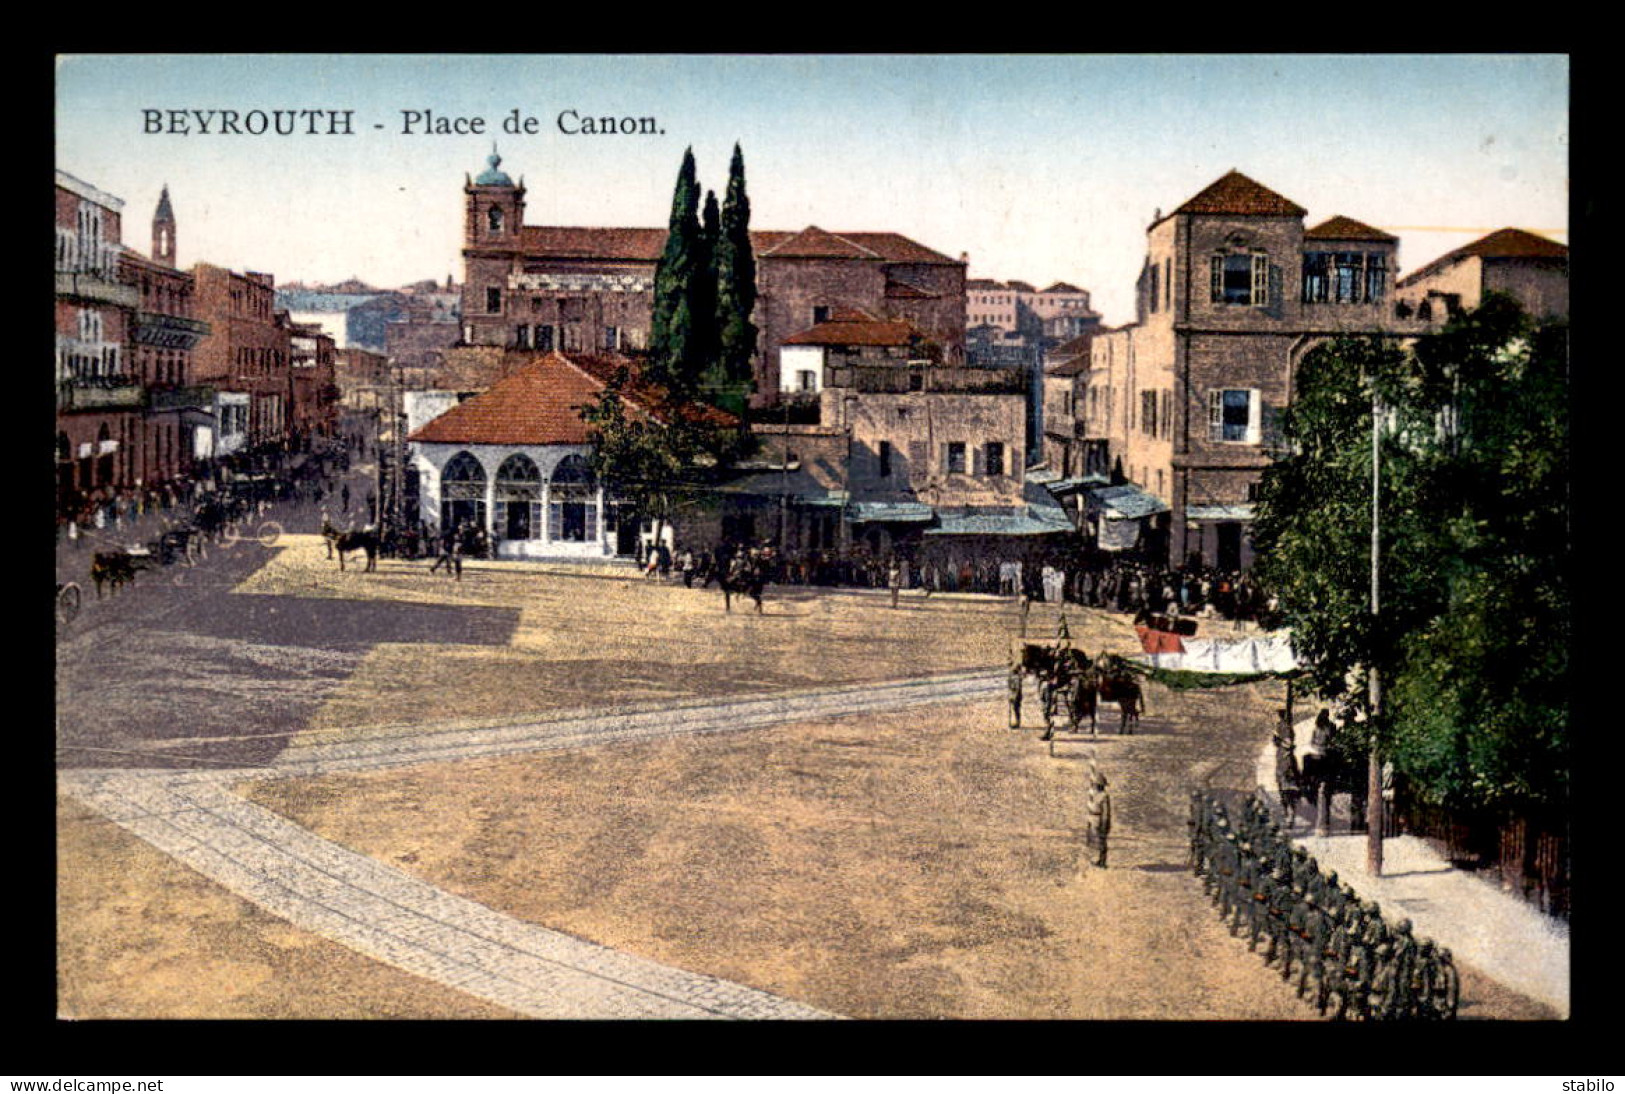 LIBAN - BEYROUTH - PLACE DES CANONS - CARTE COLORISEE - Lebanon